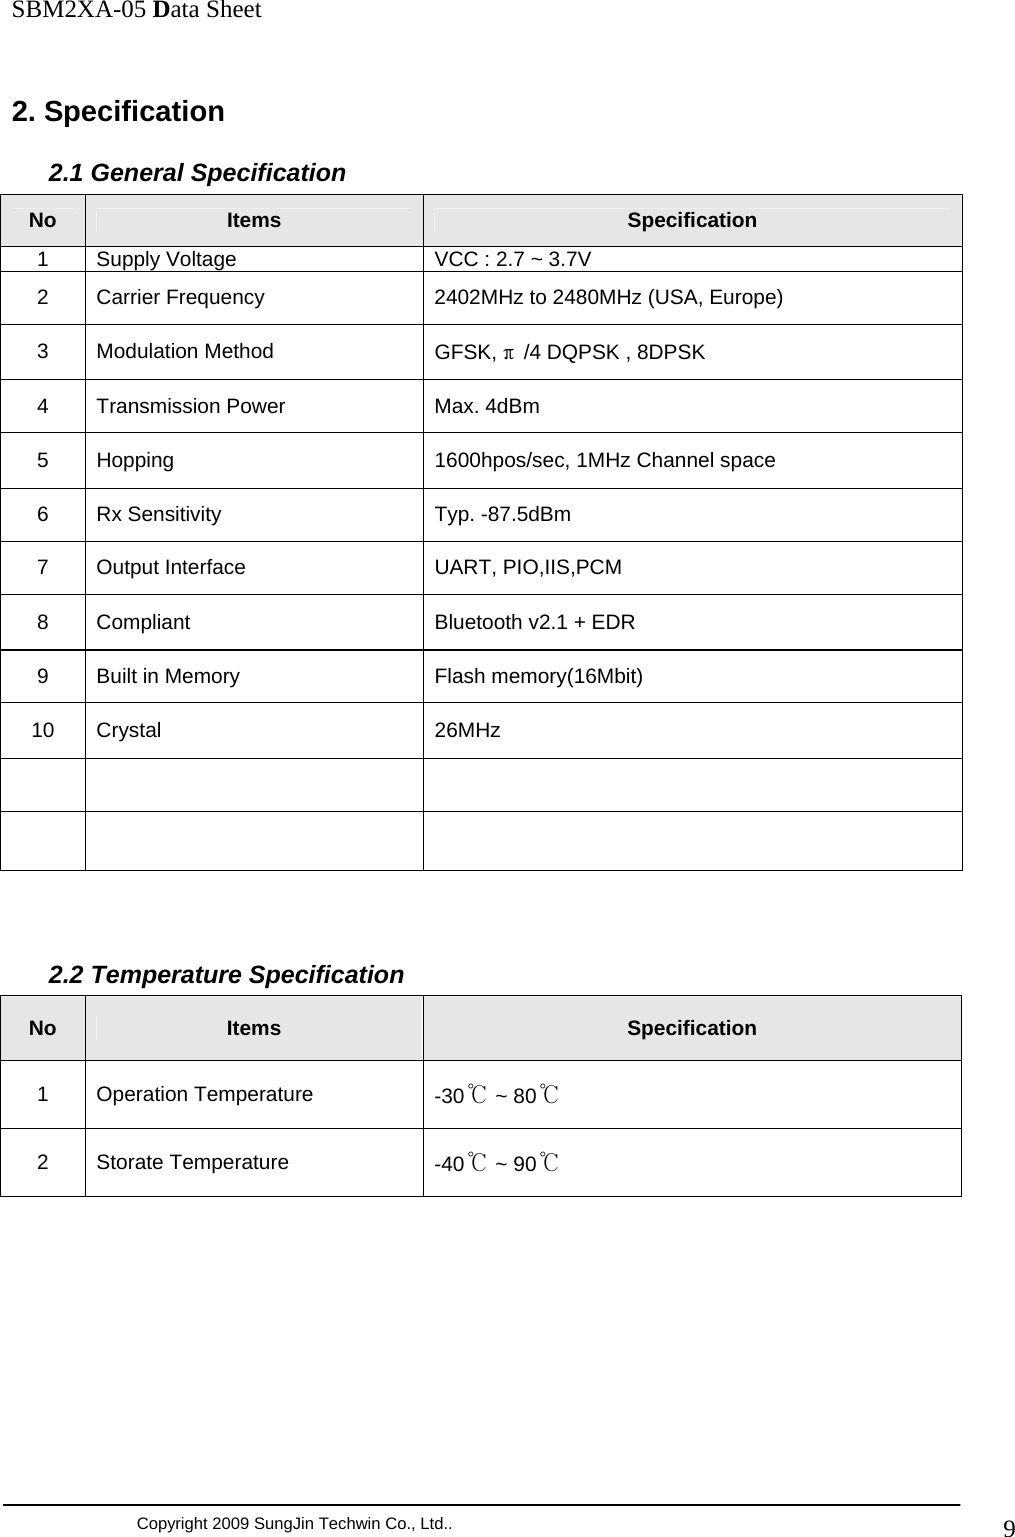               SBM2XA-05 Data Sheet  Copyright 2009 SungJin Techwin Co., Ltd..   92. Specification   2.1 General Specification No  Items  Specification 1  Supply Voltage  VCC : 2.7 ~ 3.7V 2  Carrier Frequency  2402MHz to 2480MHz (USA, Europe) 3 Modulation Method  GFSK, π/4 DQPSK , 8DPSK 4  Transmission Power  Max. 4dBm 5  Hopping  1600hpos/sec, 1MHz Channel space 6  Rx Sensitivity  Typ. -87.5dBm 7  Output Interface  UART, PIO,IIS,PCM 8  Compliant  Bluetooth v2.1 + EDR 9  Built in Memory  Flash memory(16Mbit) 10 Crystal   26MHz             2.2 Temperature Specification No  Items  Specification 1 Operation Temperature  -30℃ ~ 80℃ 2 Storate Temperature  -40℃ ~ 90℃  